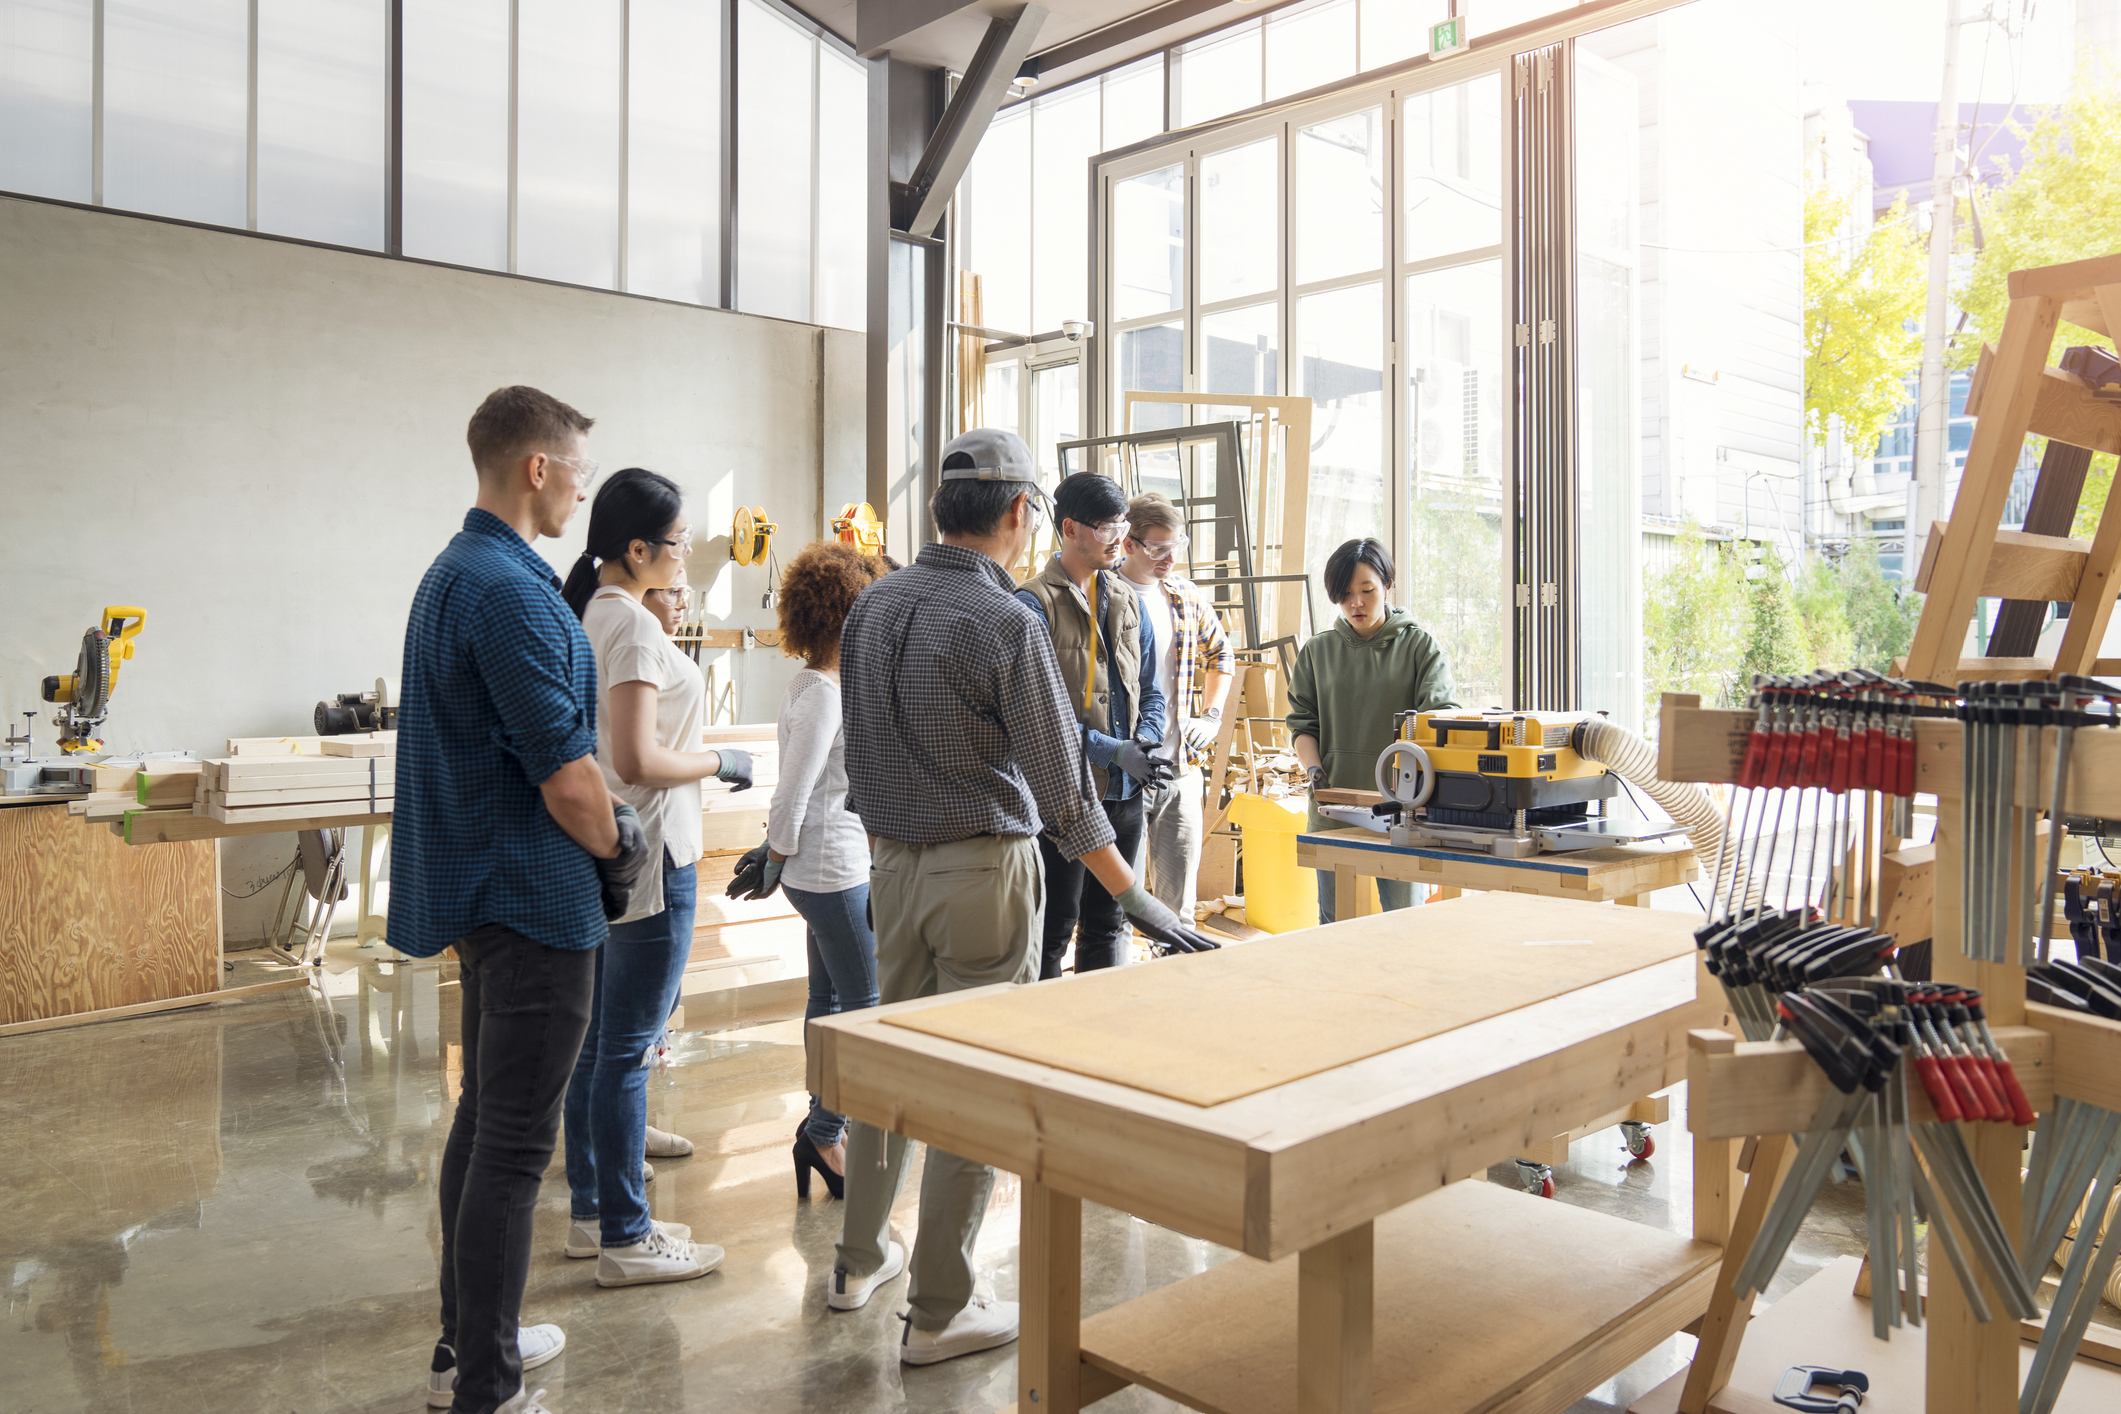 A group of adults and teenagers gather around a woodworking table, attentively watching a demonstration in a bright, modern workshop